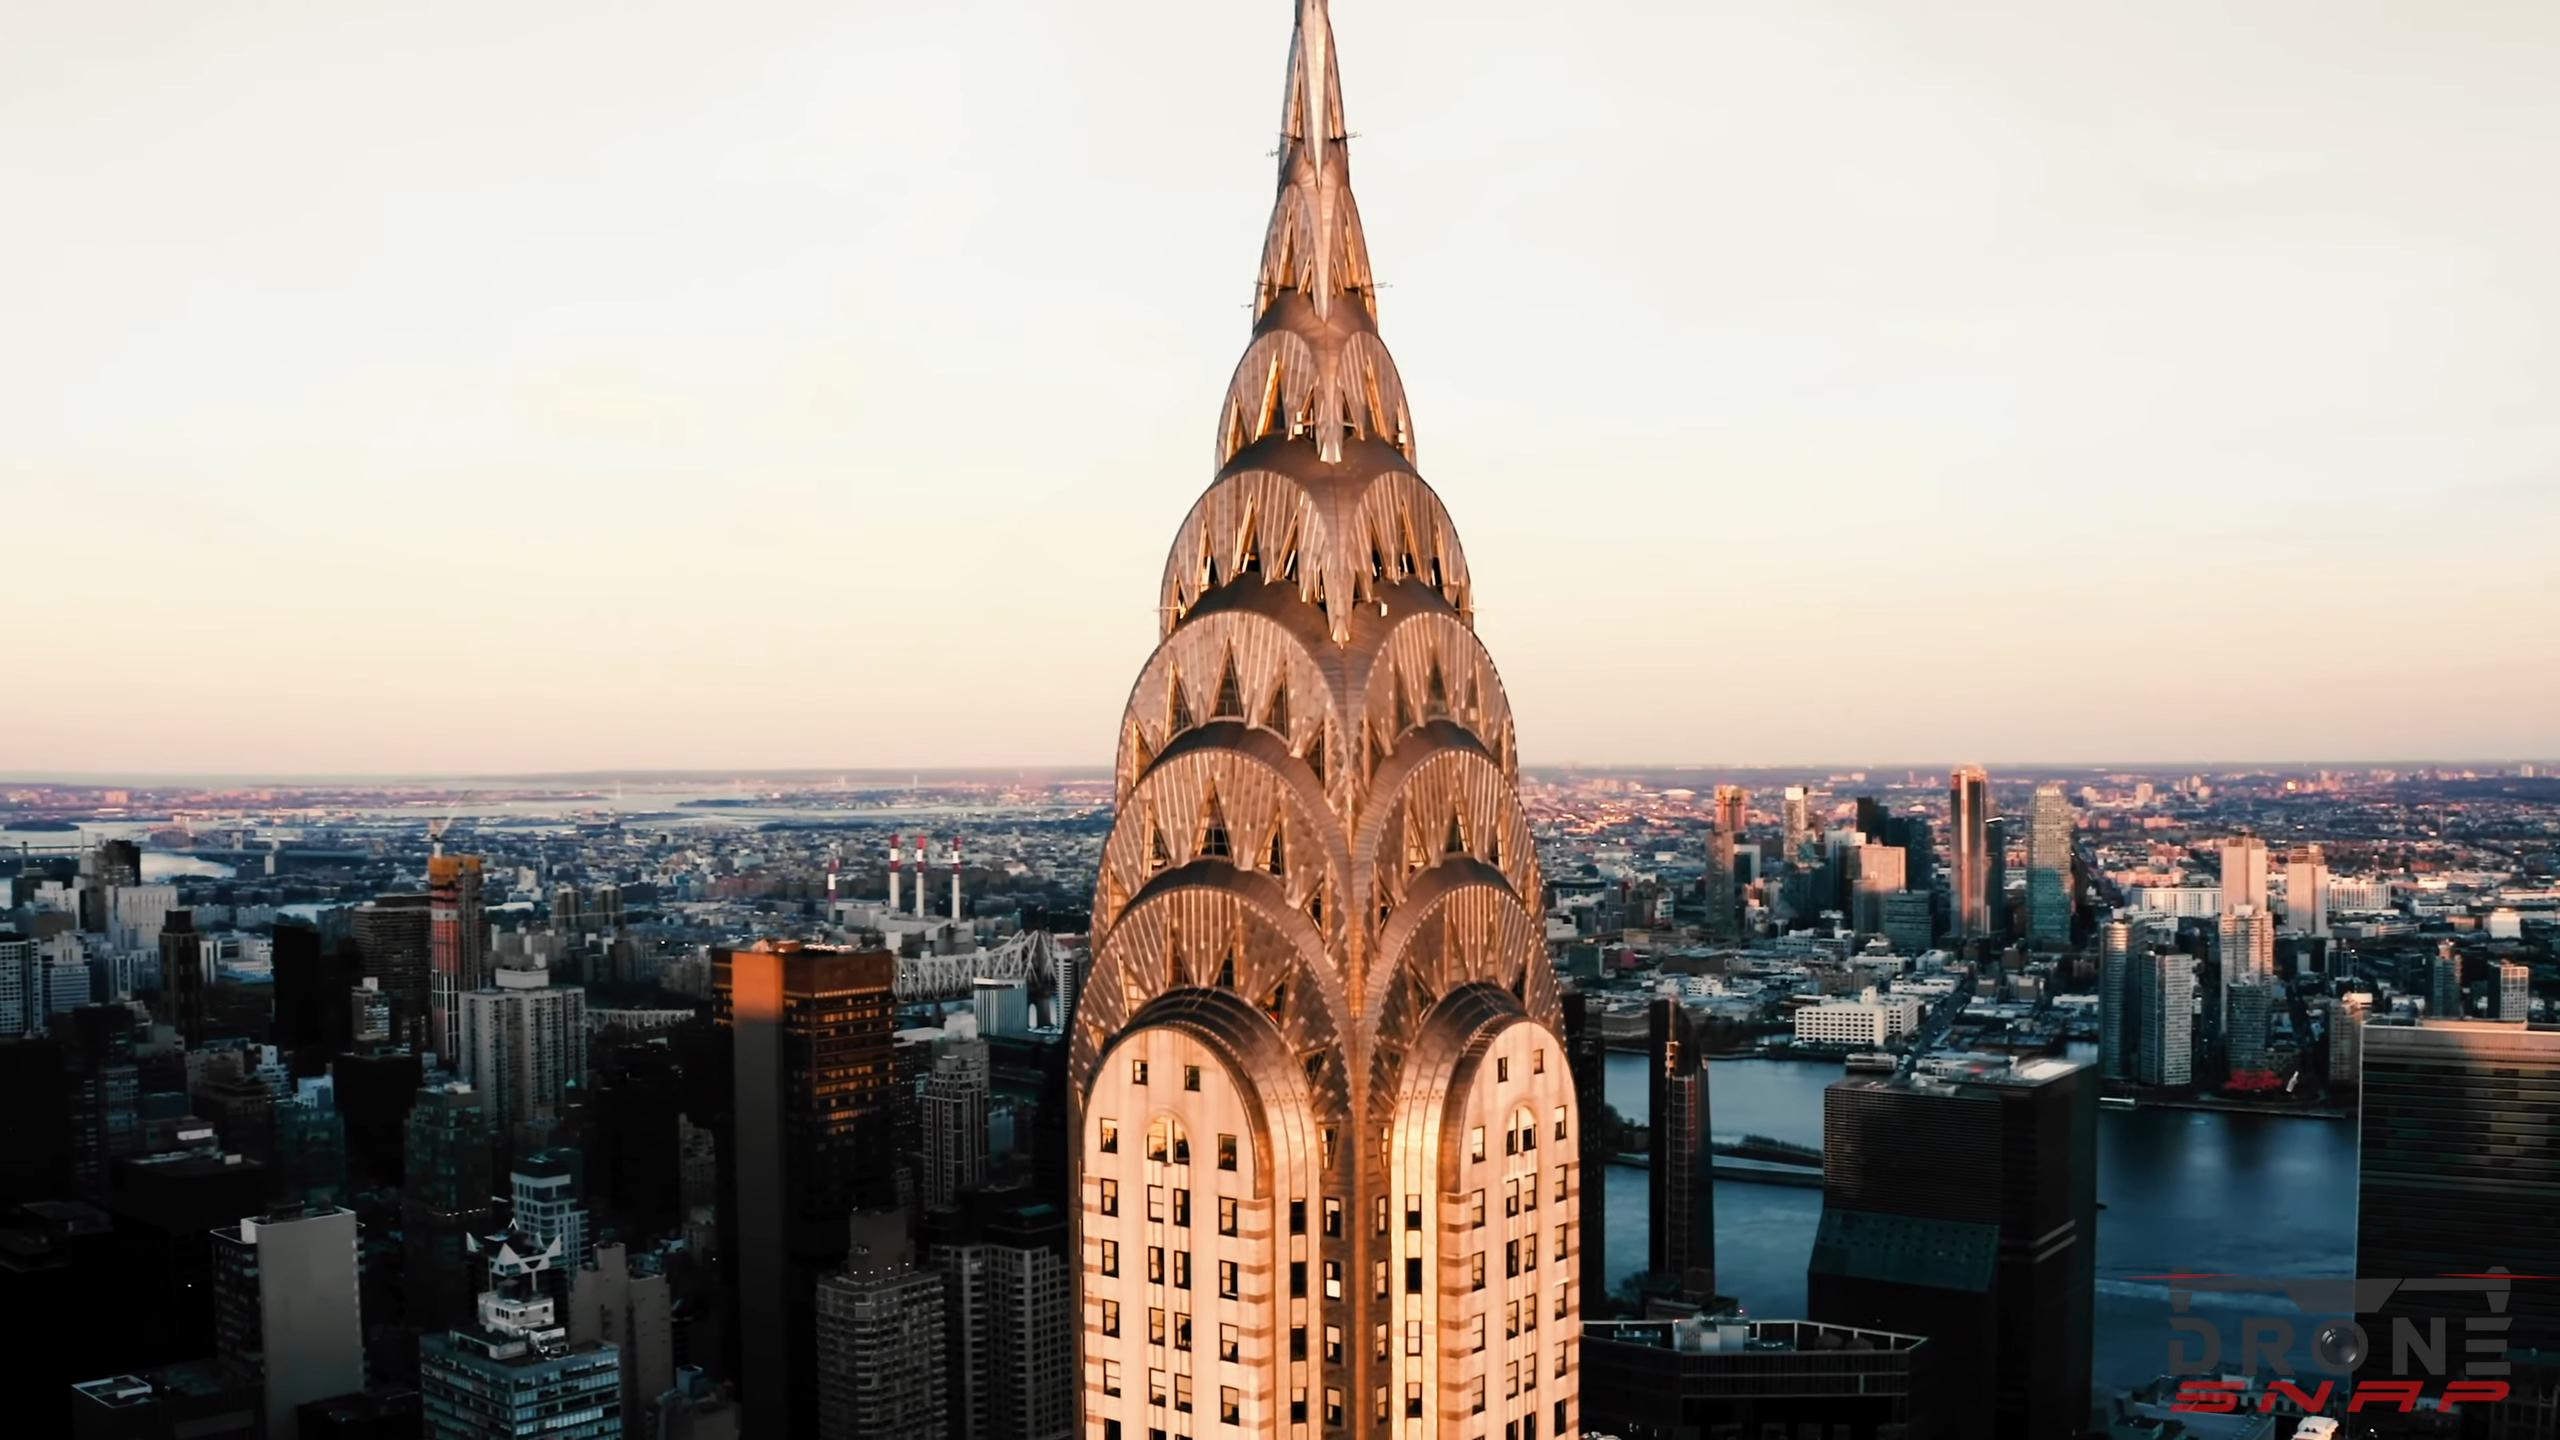 The Chrysler Building - tallest nyc buildings